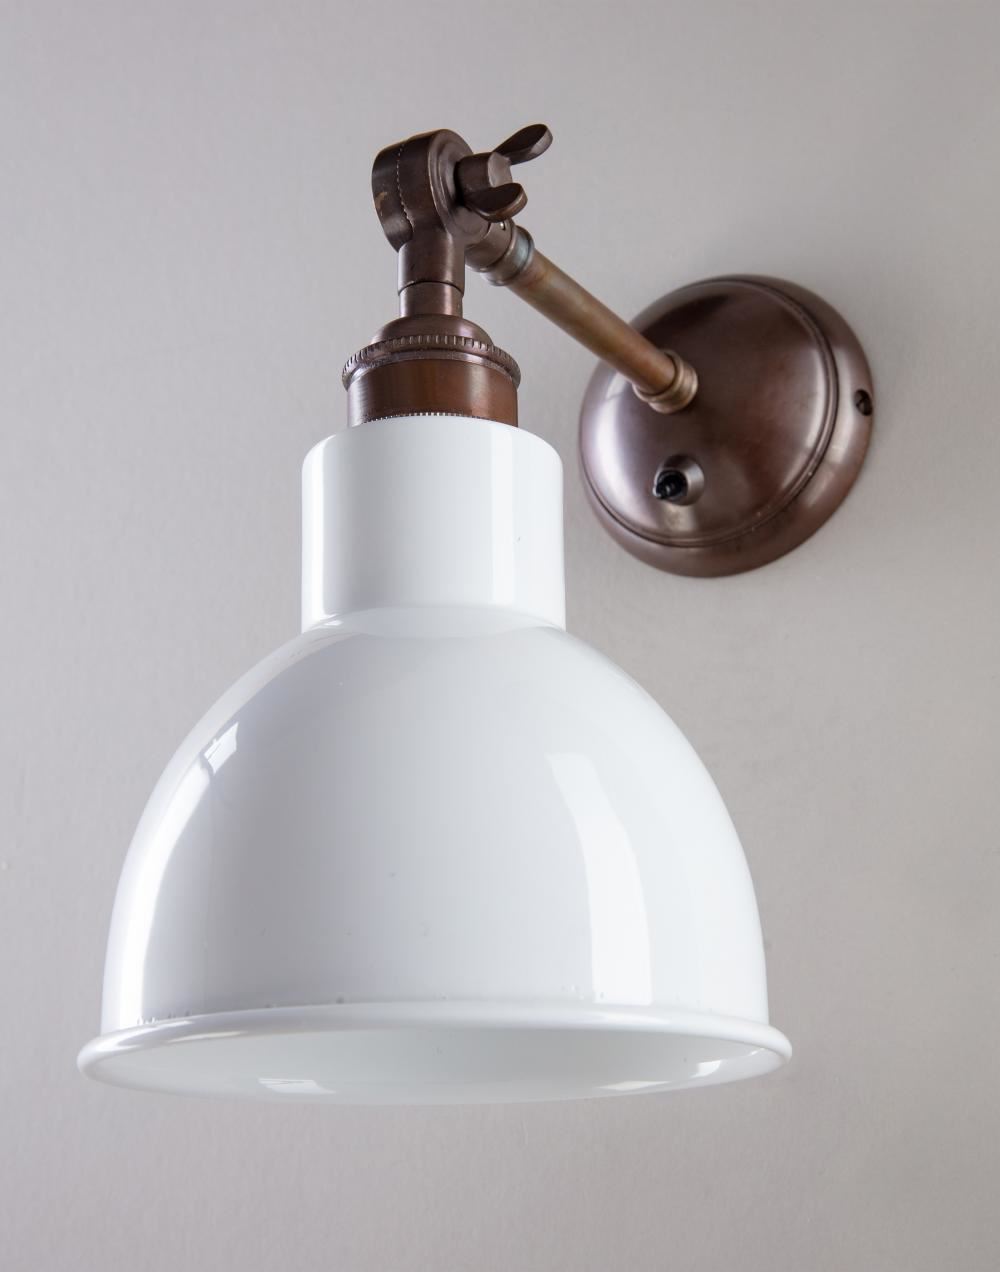 Old School Electric Churchill Wall Light Coloured Shades Switched Antique Brass White Shade